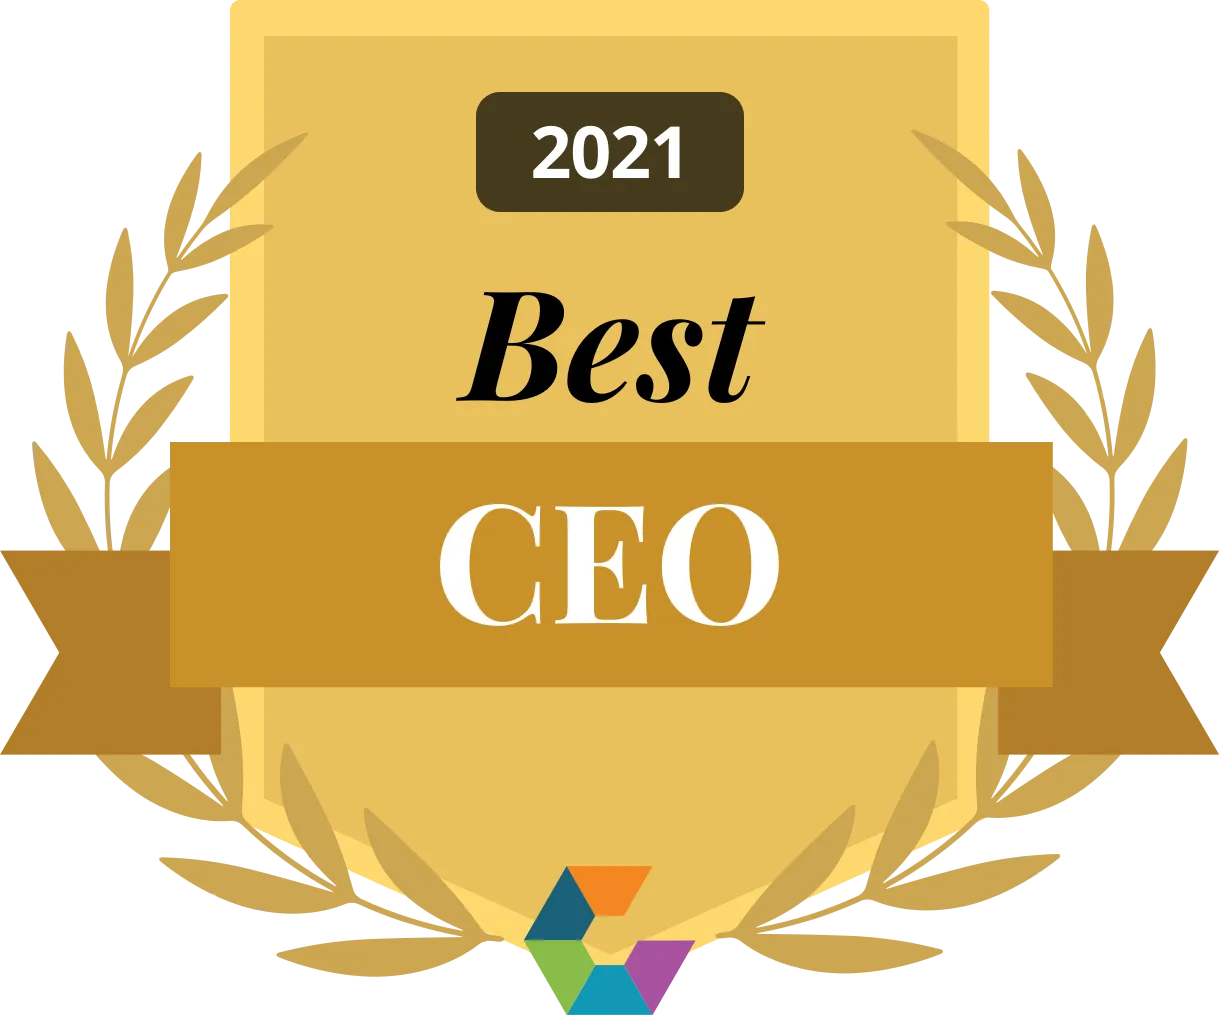 Comparably Best CEO 2021